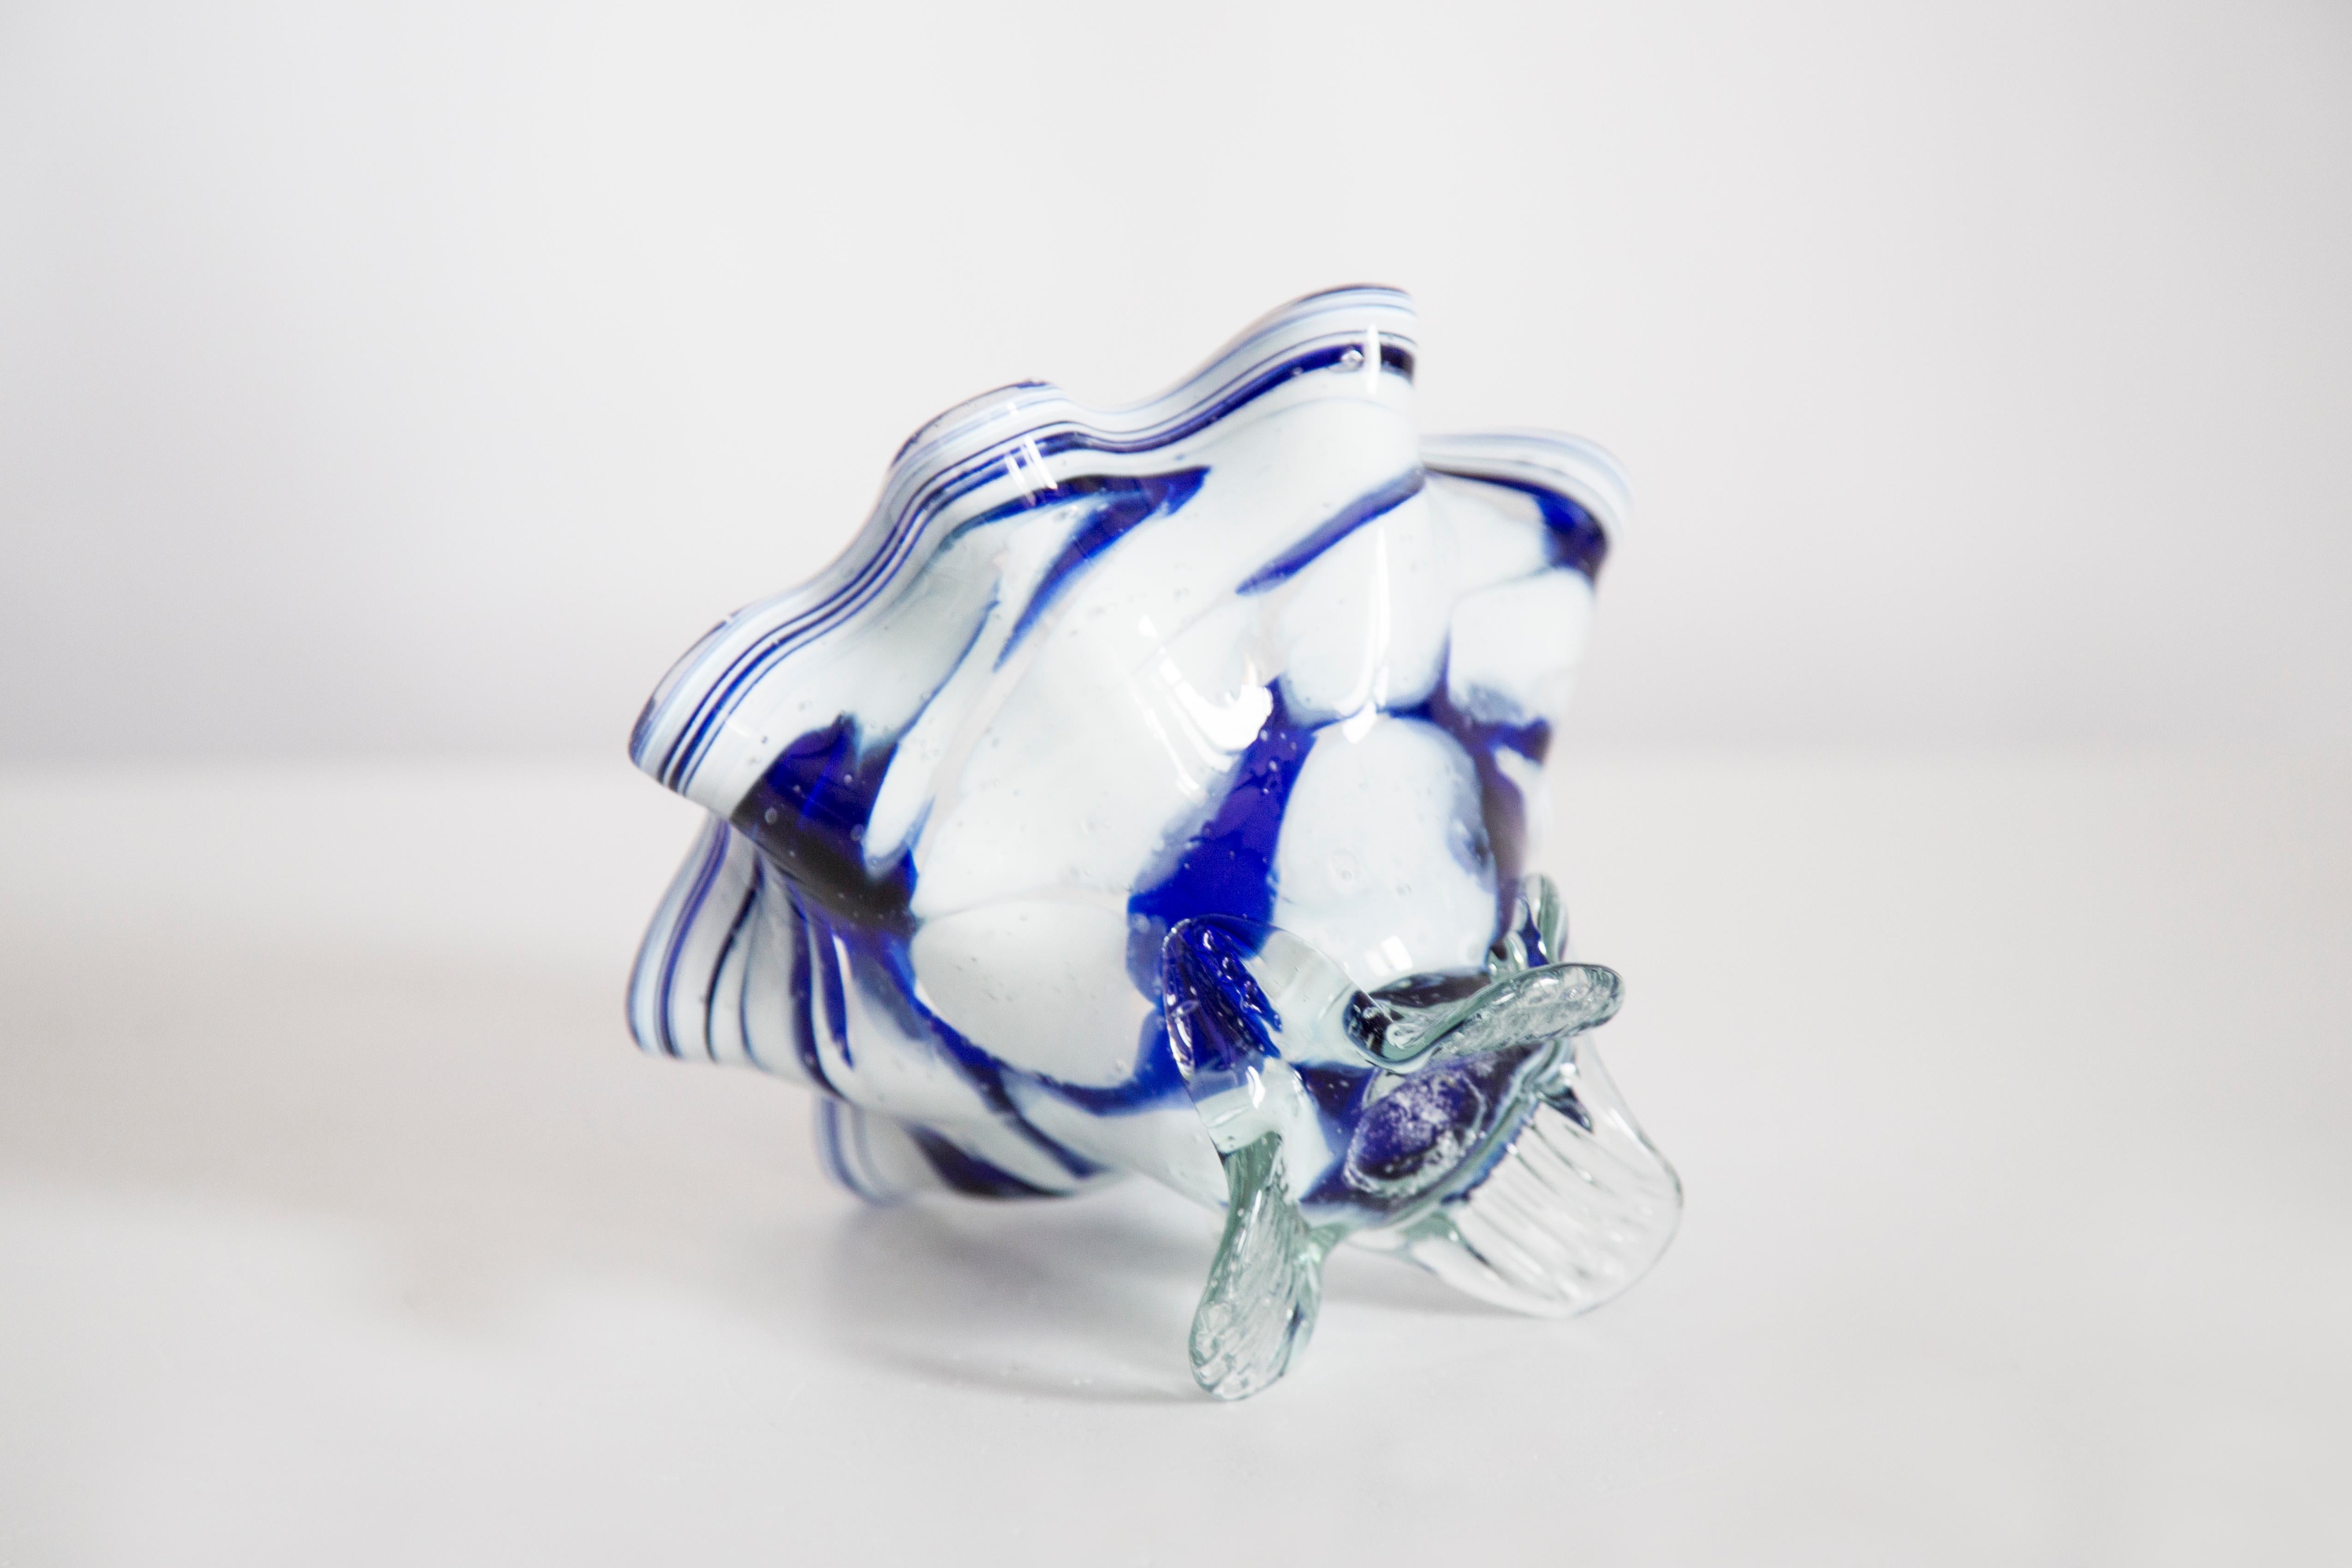 Mid Century Vintage Artistic Glass White and Blue Vase Bowl, Europe, 1970s For Sale 3